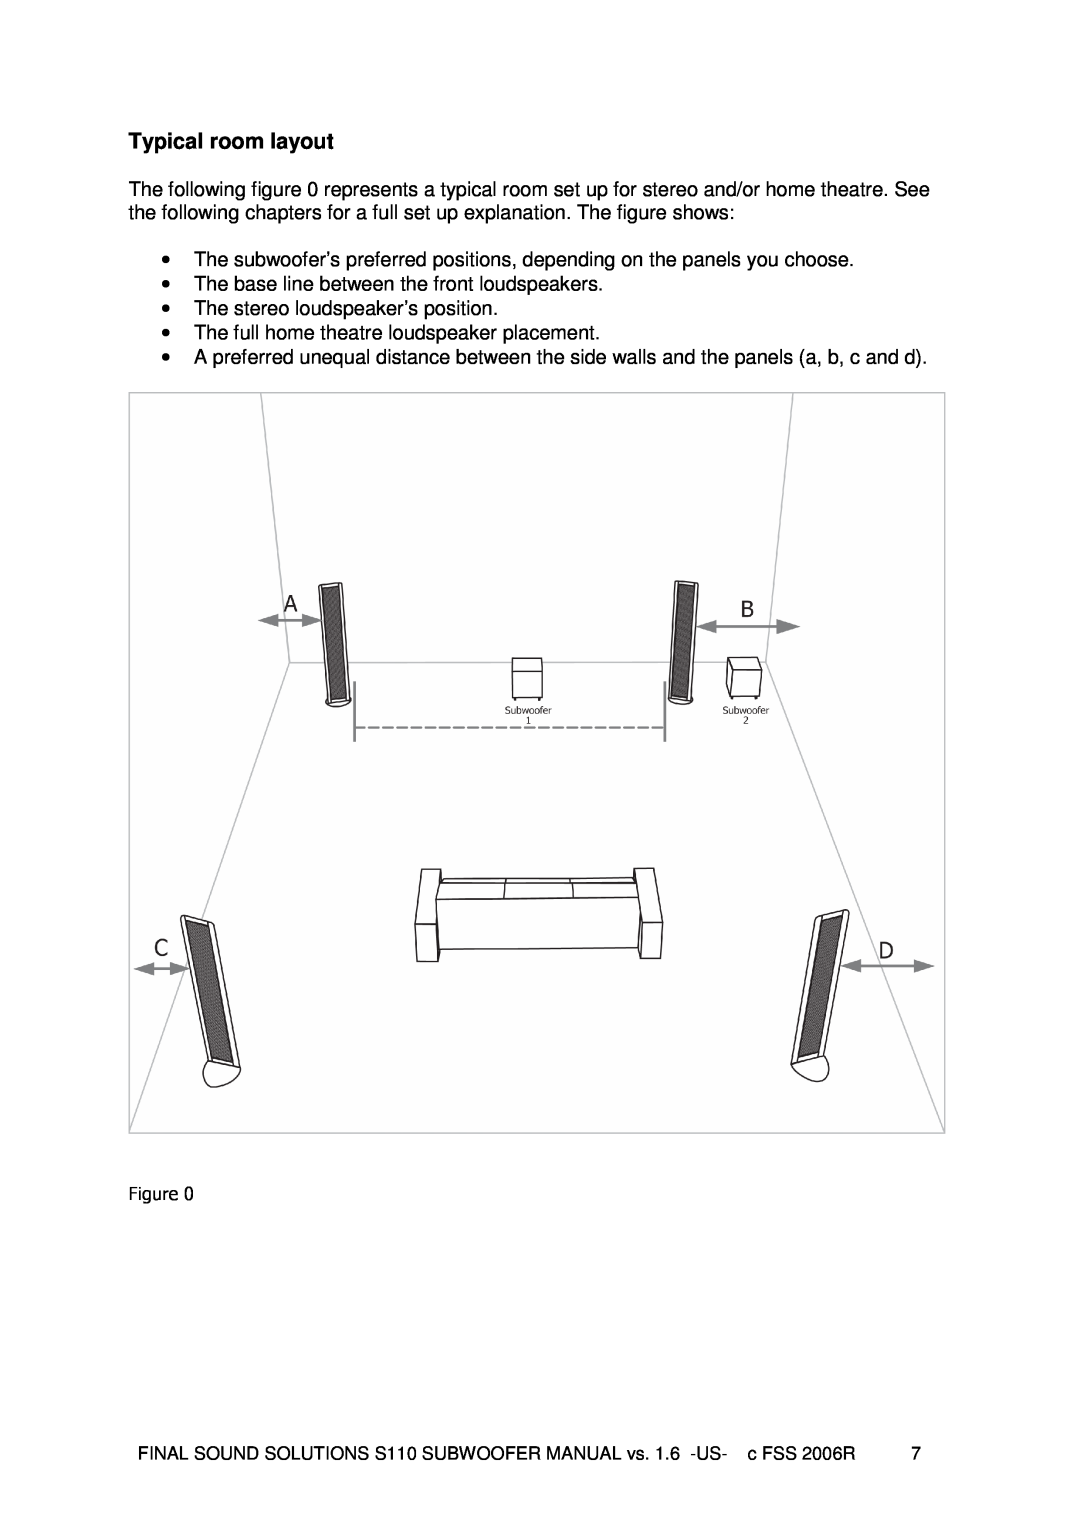 Final Sound S110 user manual Typical room layout 